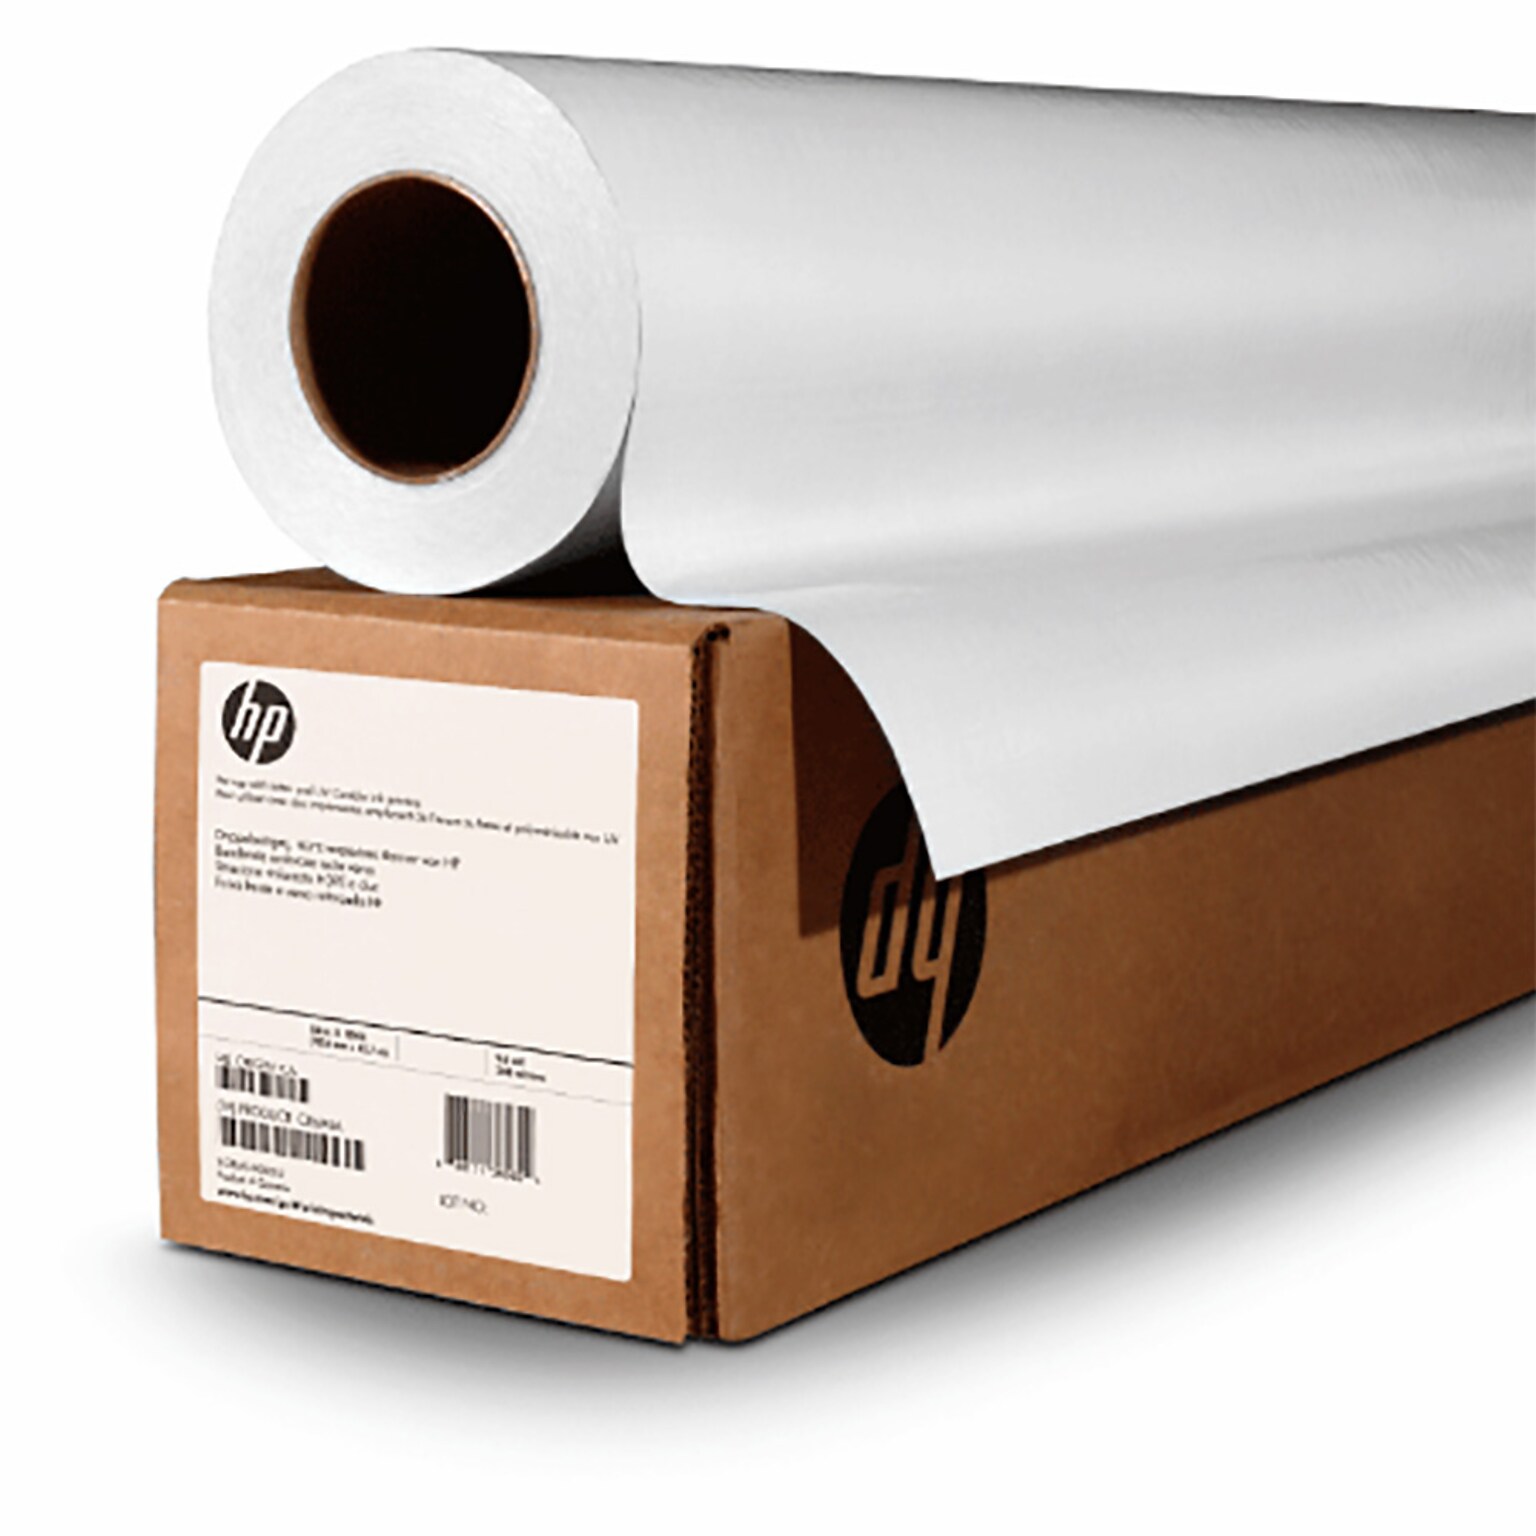 HP Universal Wide Format Permanent Adhesive Paper, 60 x 150, Matte Finish (J3H73A)